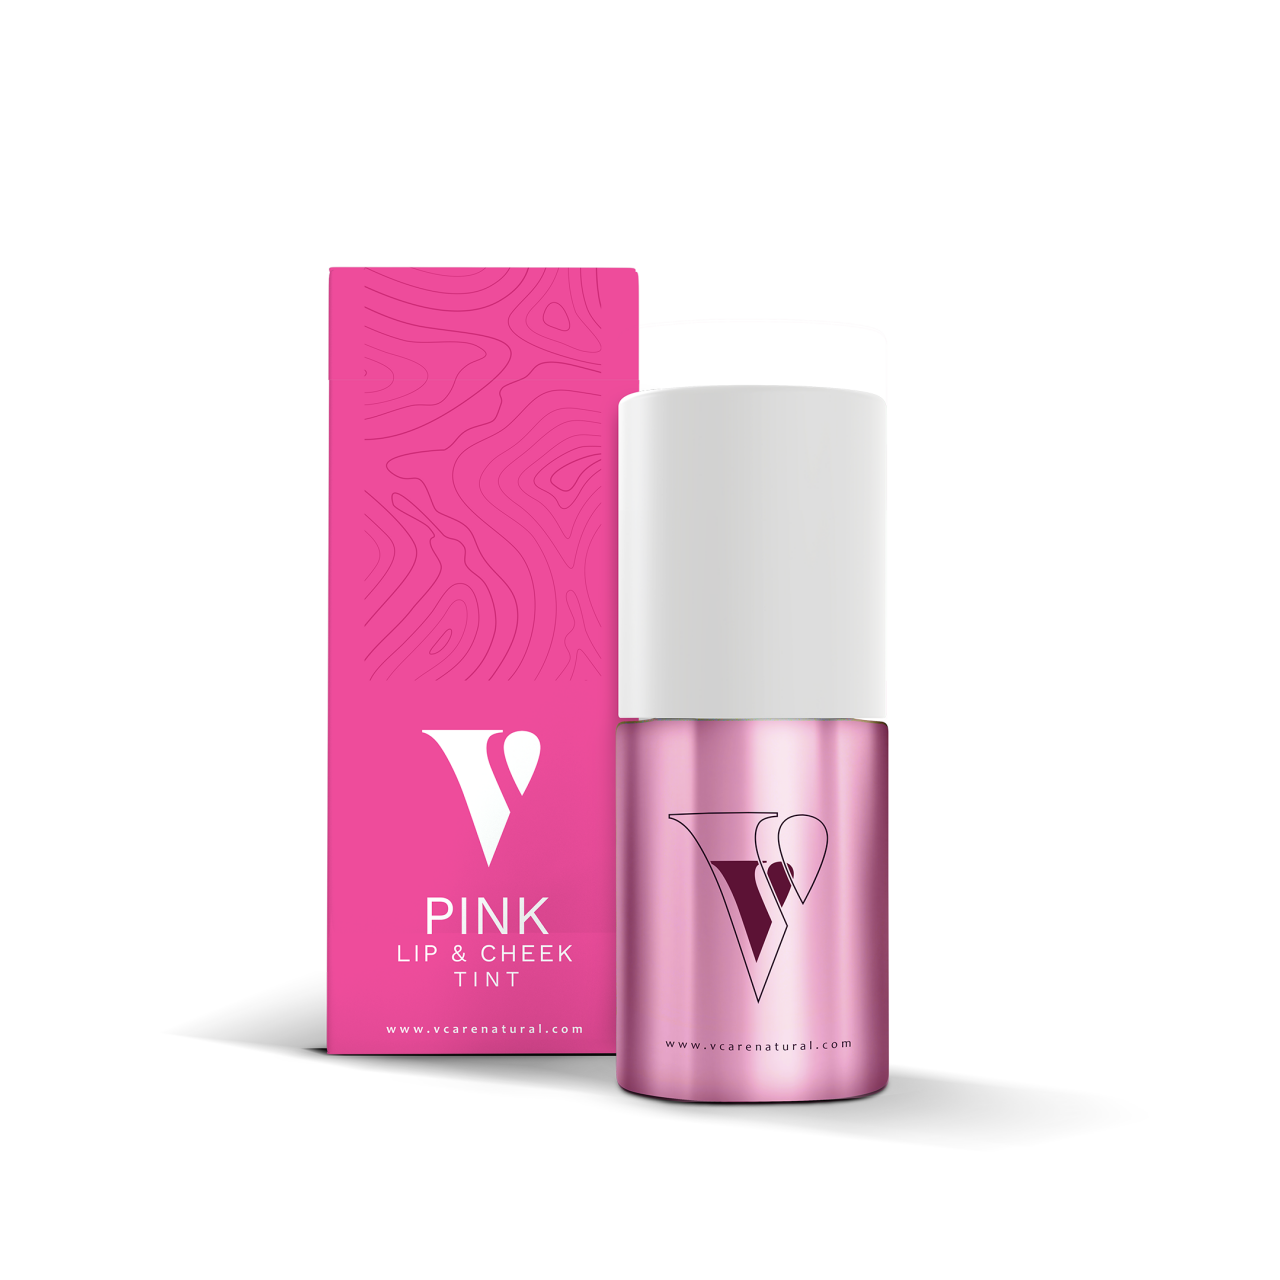 VCARE Natural Pink Tint Price in Pakistan - Homeshopping